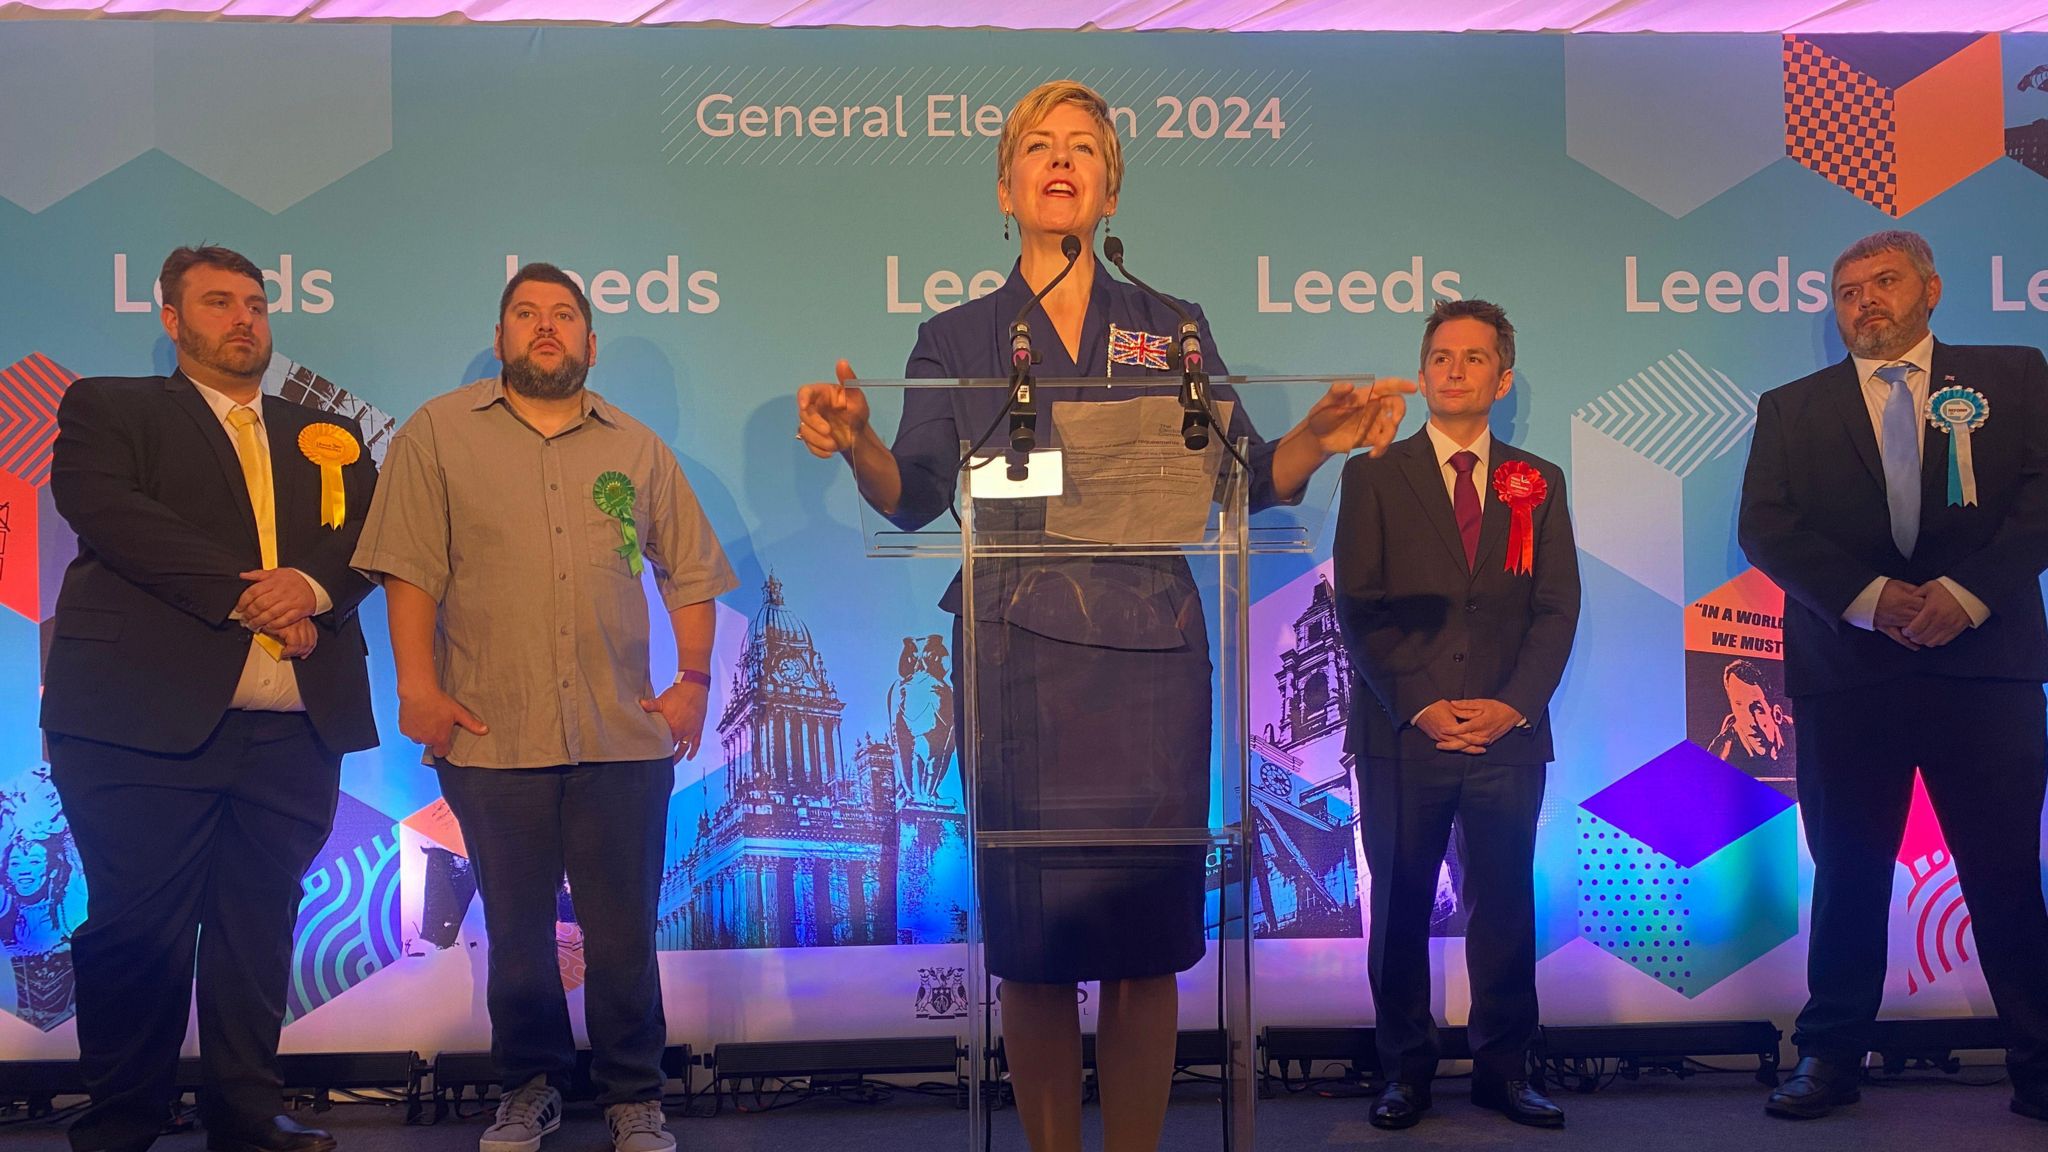 Conservative Andrea Jenkyns making concession speech